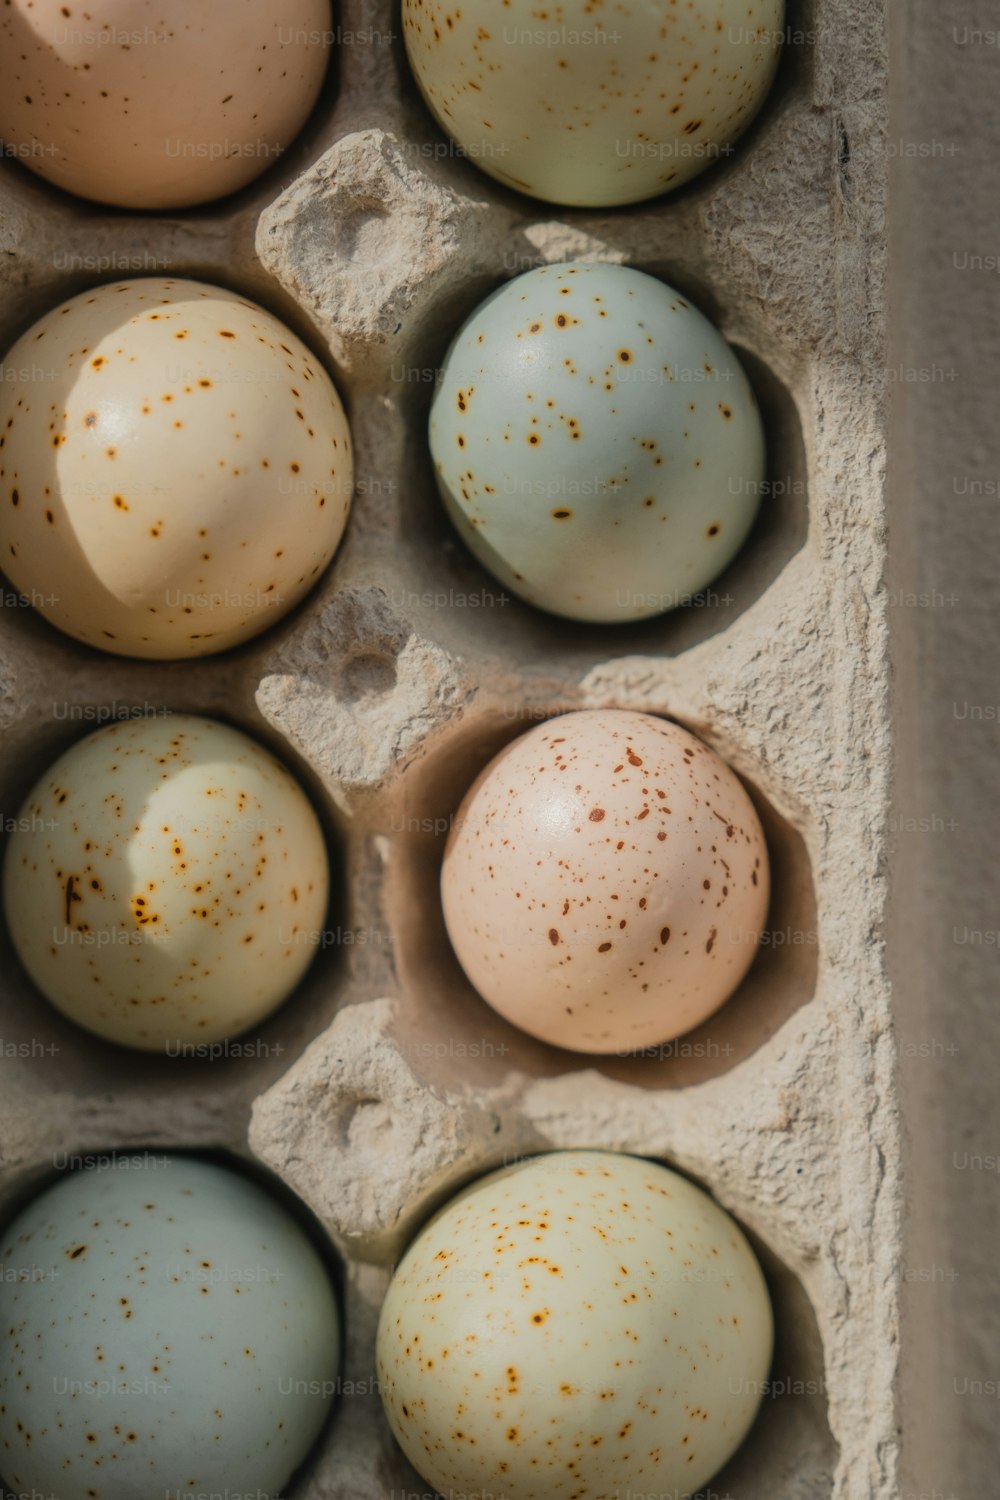 six eggs in a carton with brown speckles